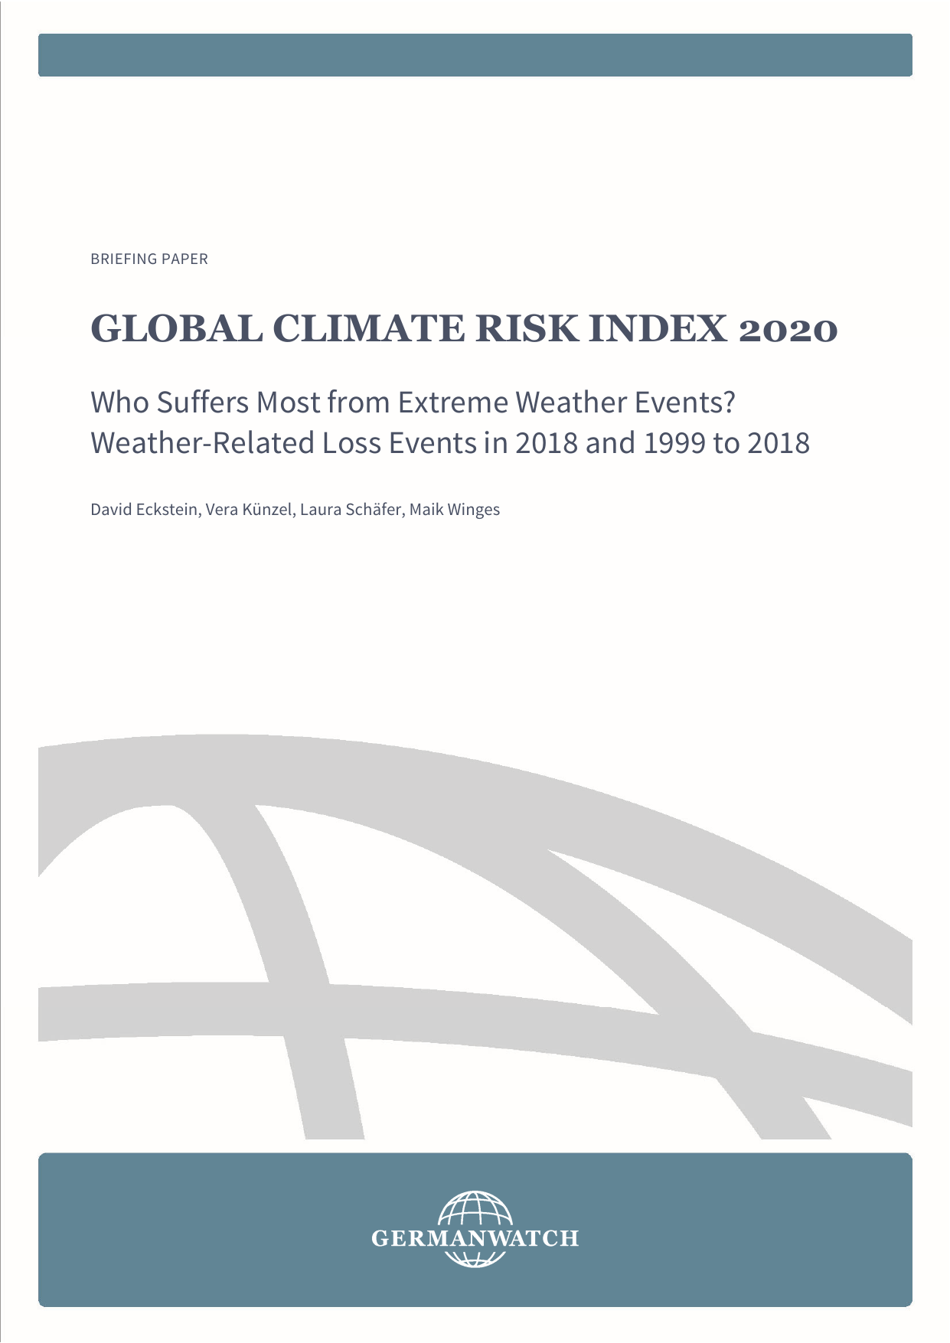 Global Climate Risk Index - Research by David Eckstein, Vera Kunzel, Laura Schafer, and Maik Winges